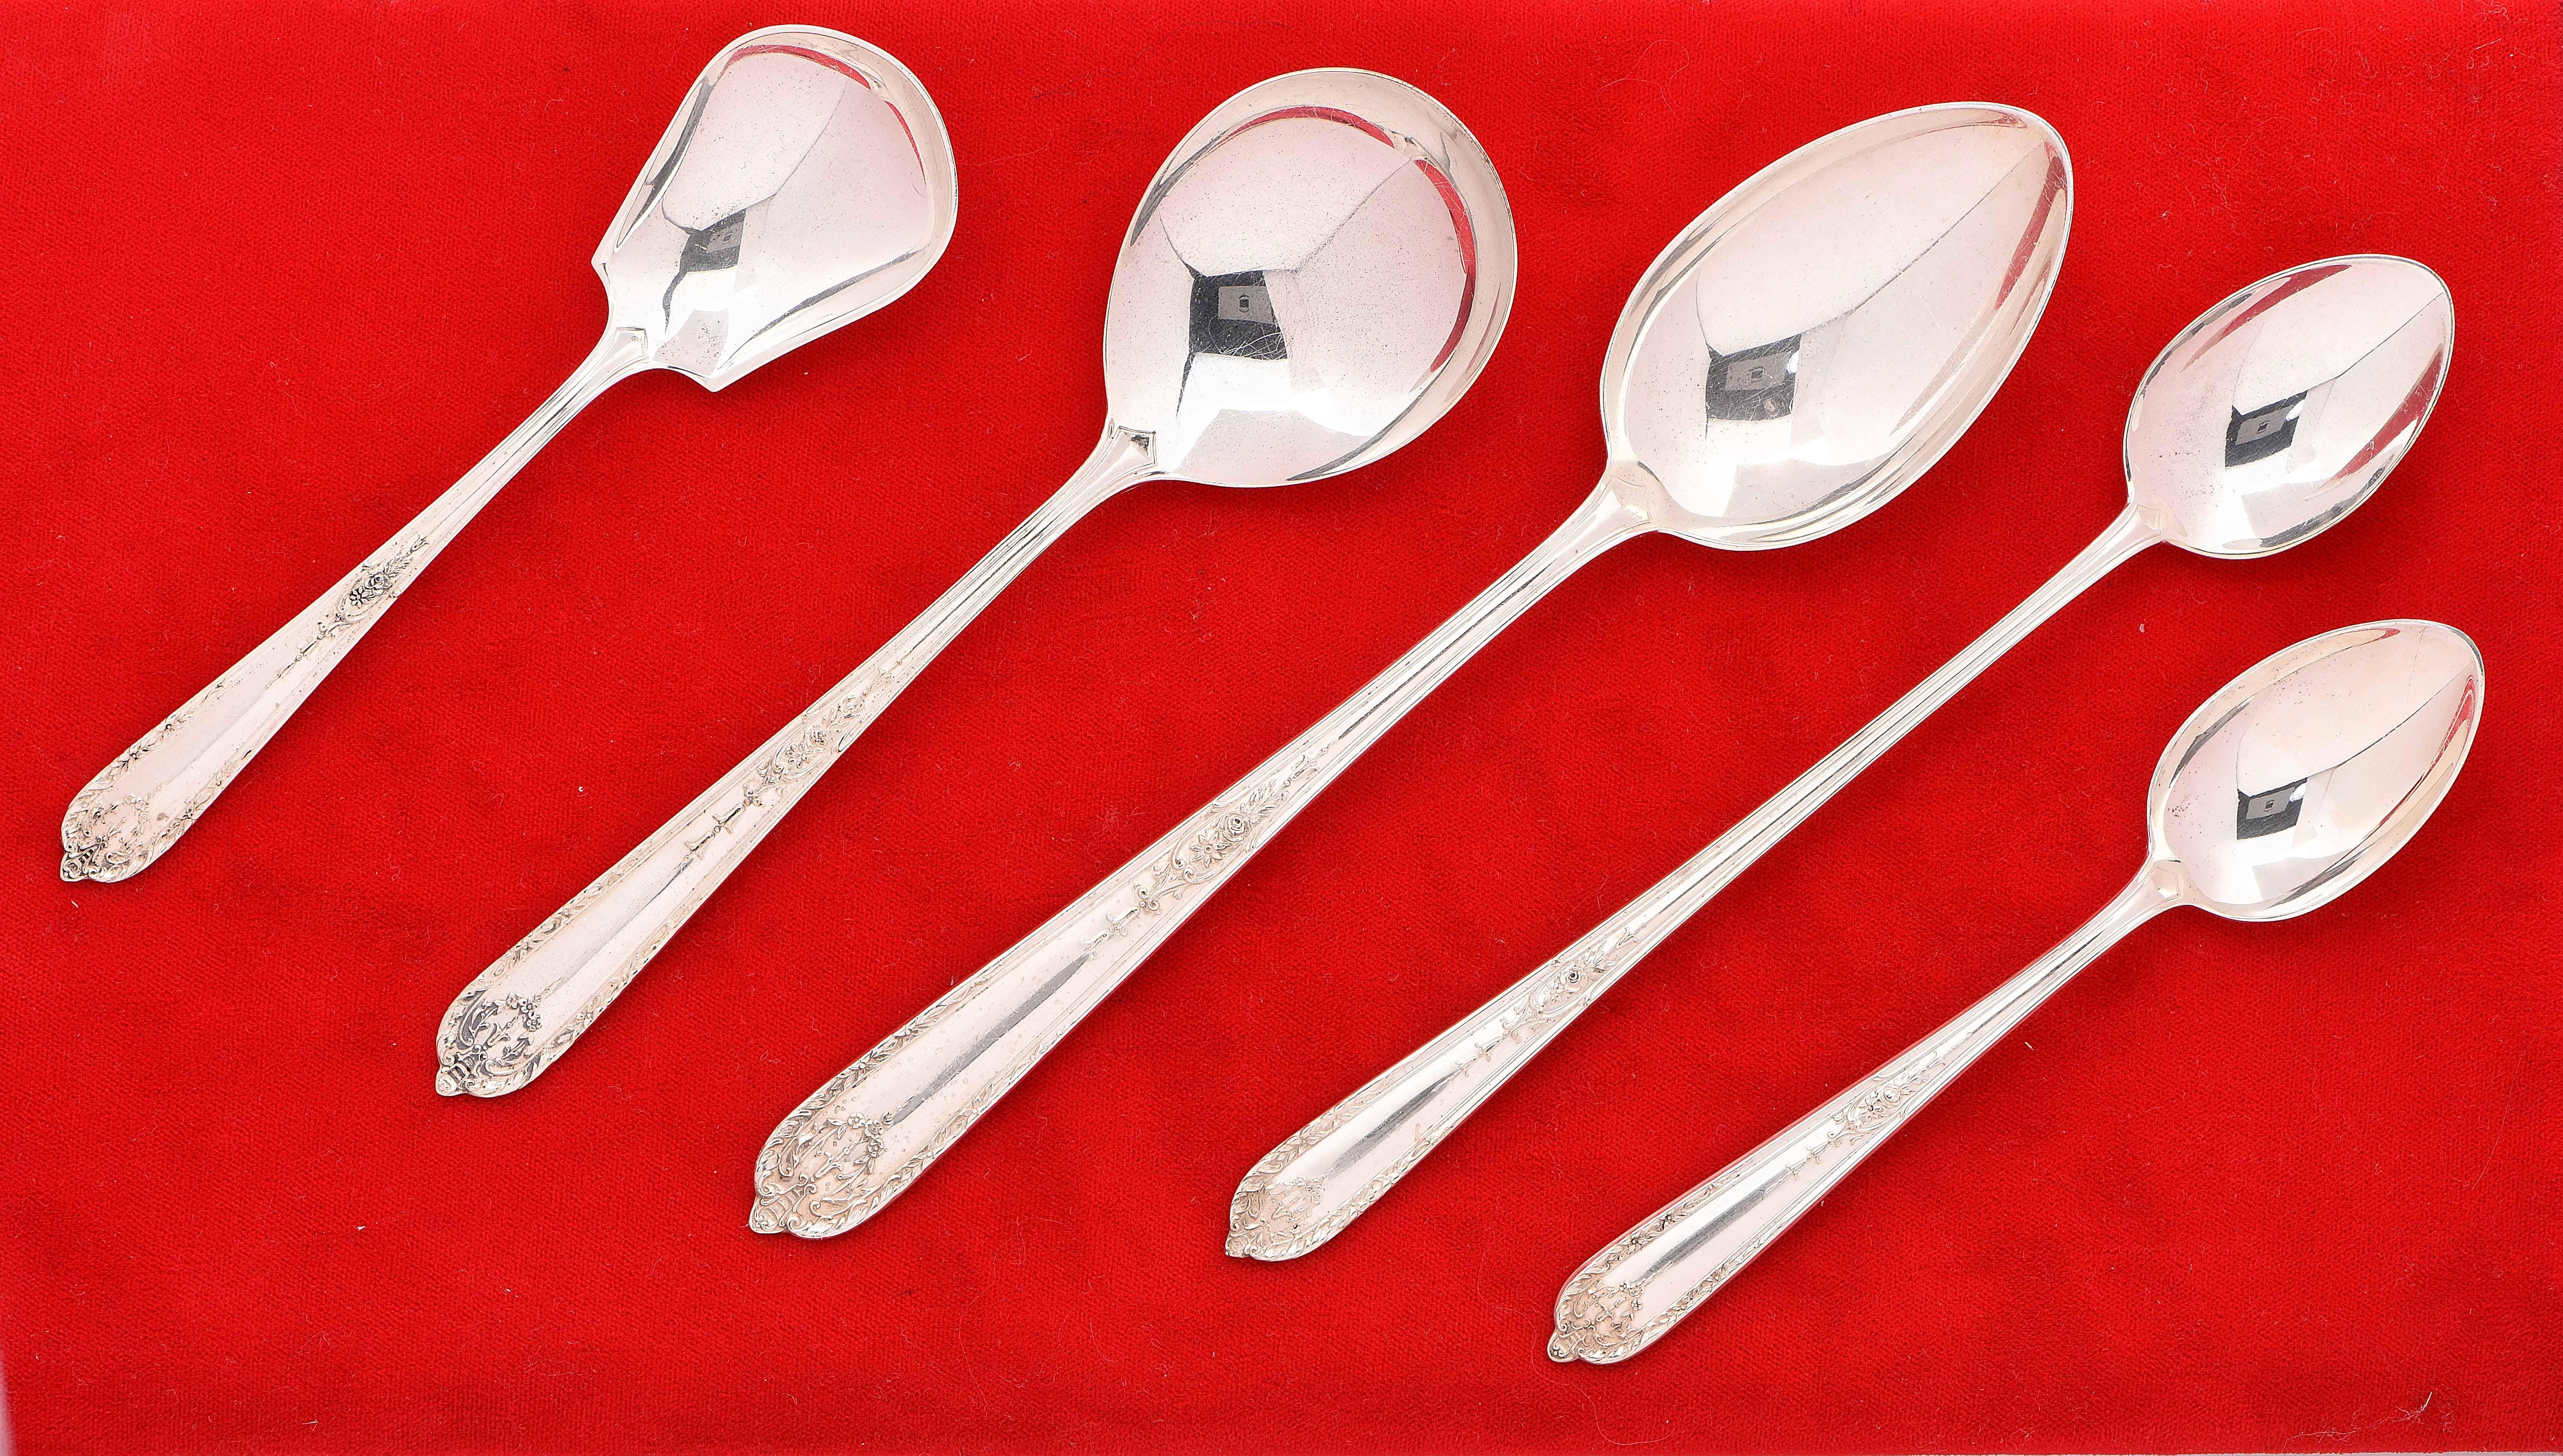 Alvin Manufacturing Sterling Silver Set, Della Robbia Design, Consisting of:
Soup Spoons 12
Drink Spoons 6
Tea Spoons 20
Desert Fork 12
Salad Fork  10
Large Fork 8
Serving Spoon 3
Butter Spoon 1
Jelly Spoon 1

Additions and replacements can be found